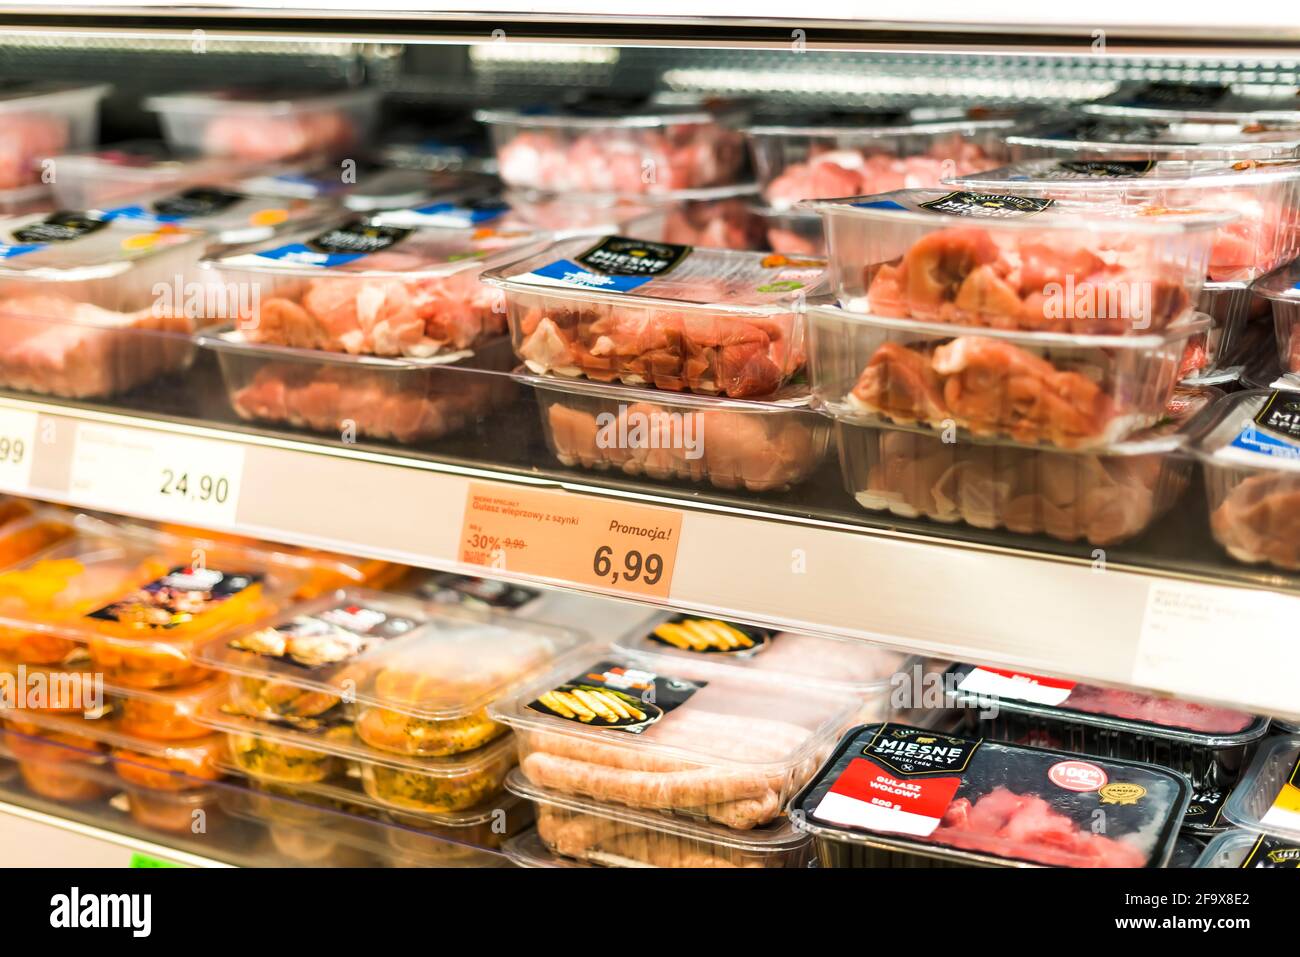 POZNAN, POL - APR 13, 2021: Meat products put up for sale in a supermarket commercial refrigerator Stock Photo